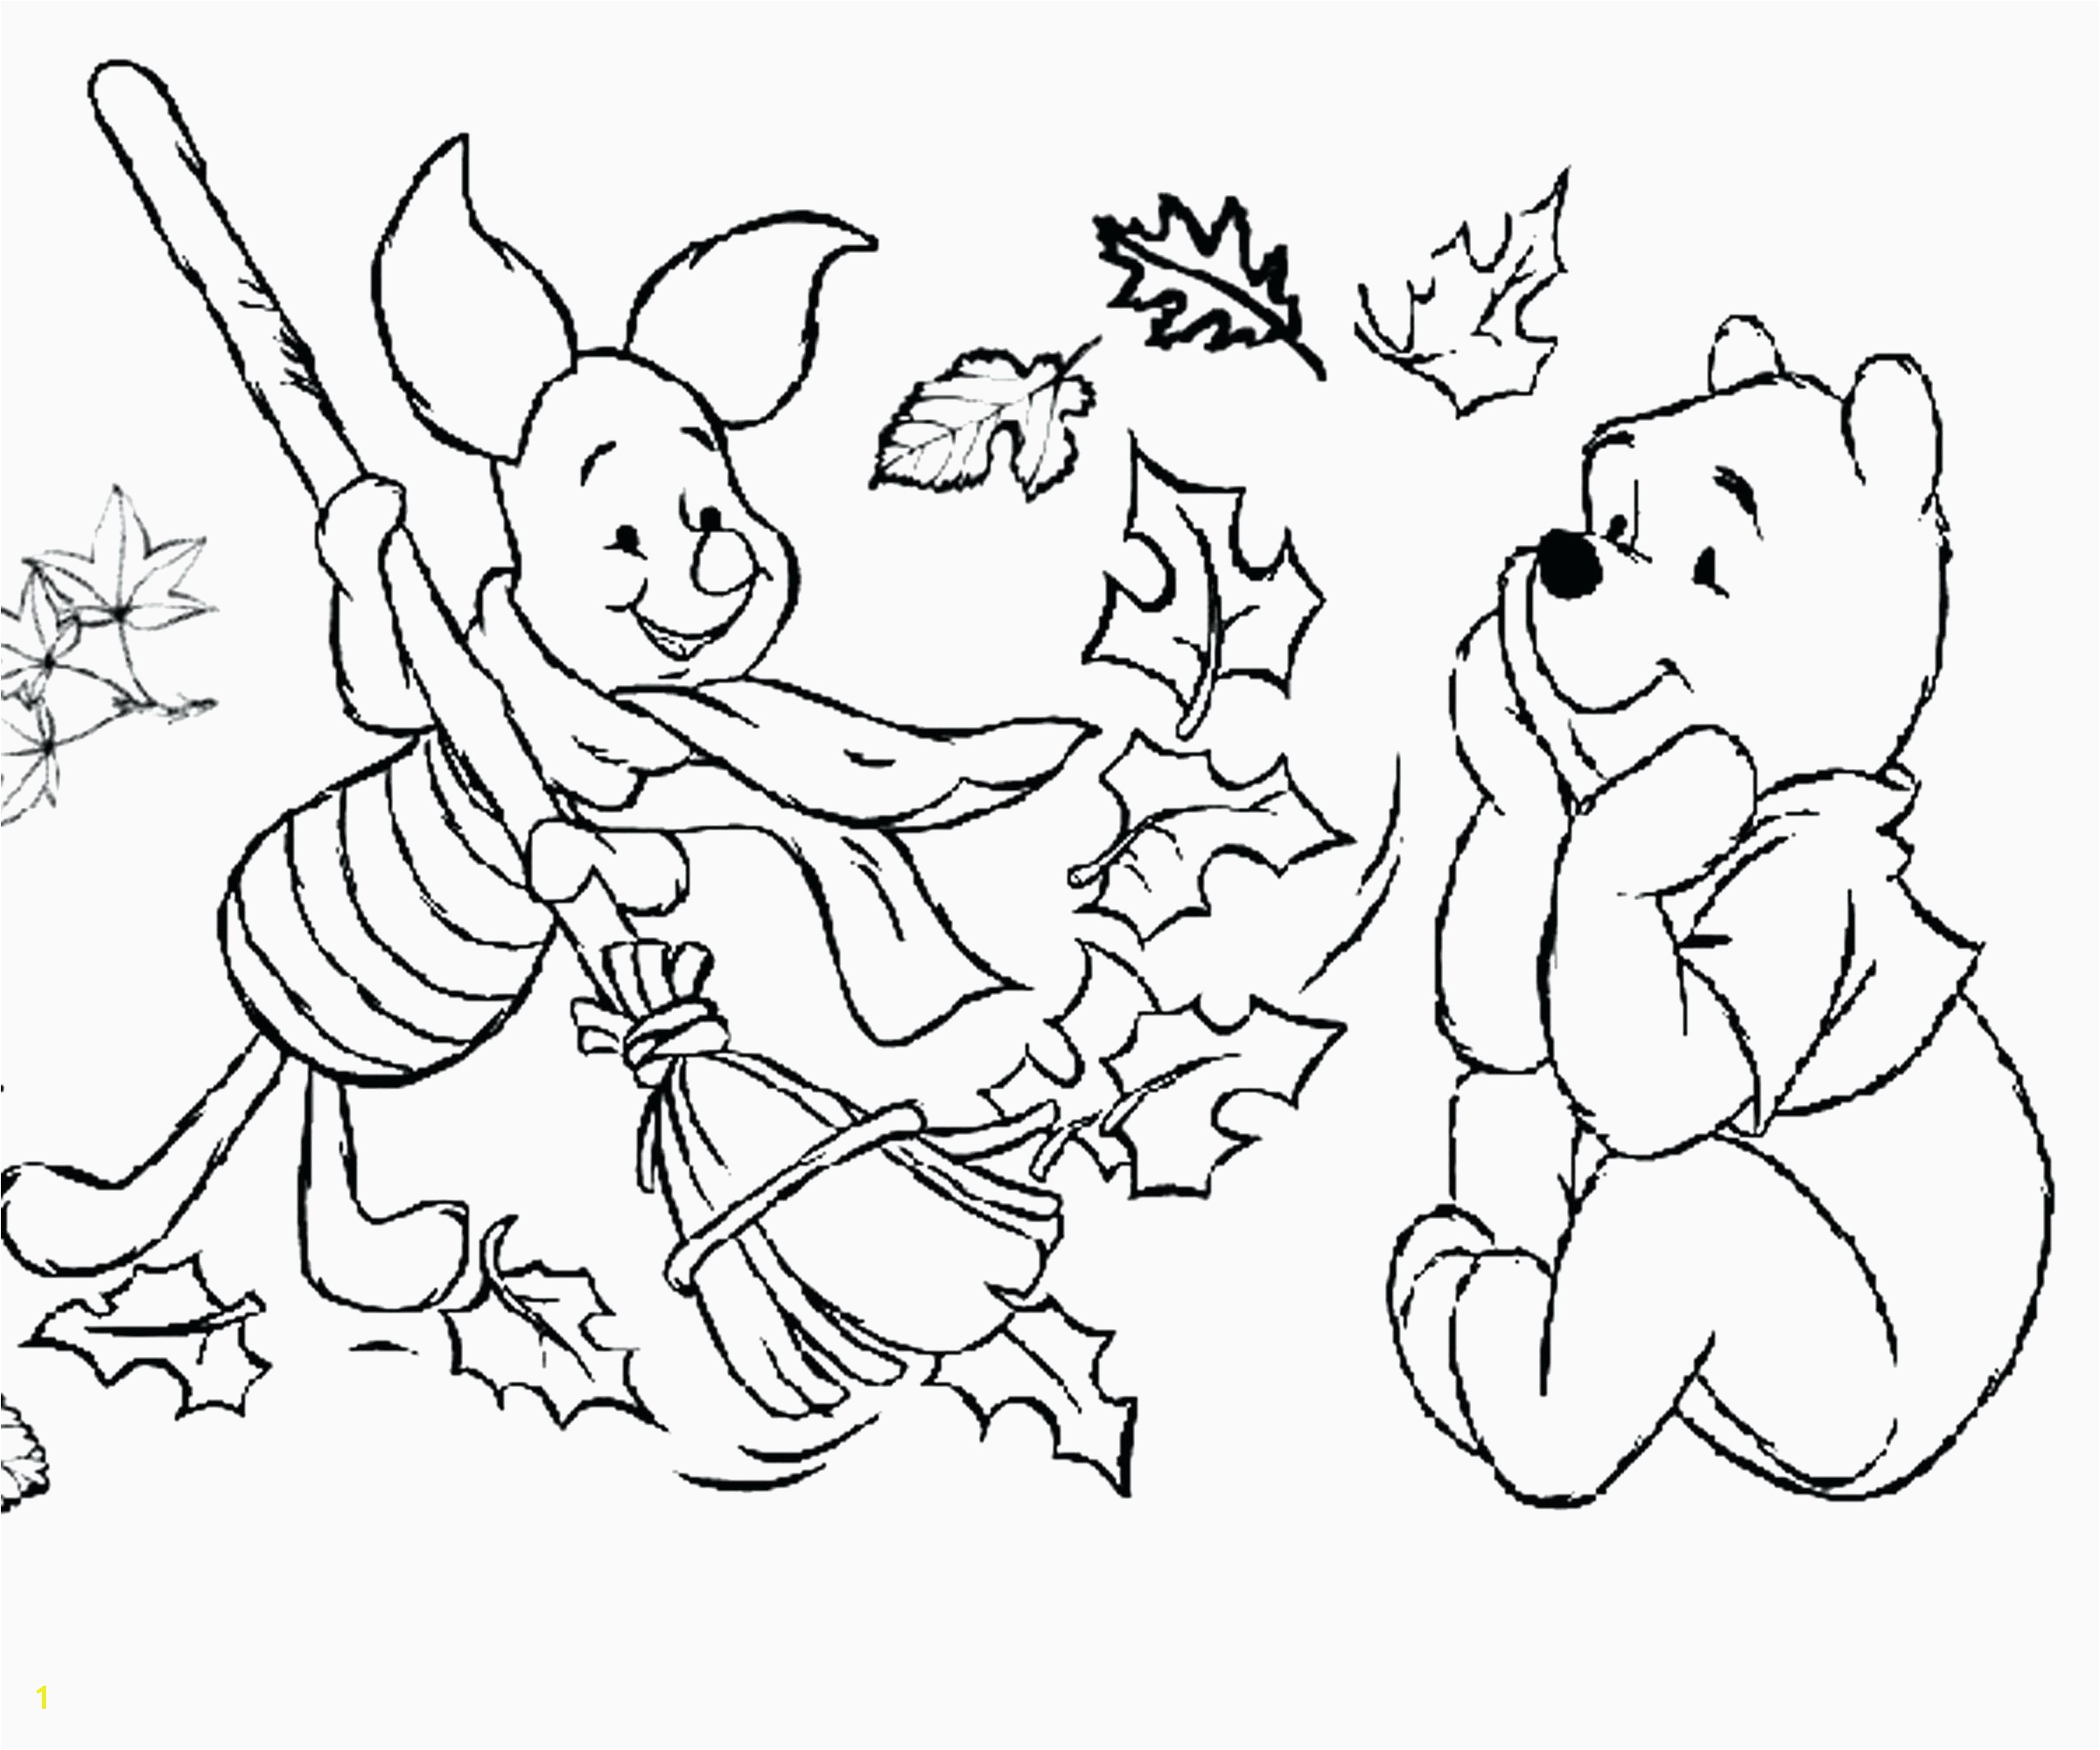 Free Winter Coloring Pages Coloring Pages Winter Animals Awesome Coloring Pages for Fall